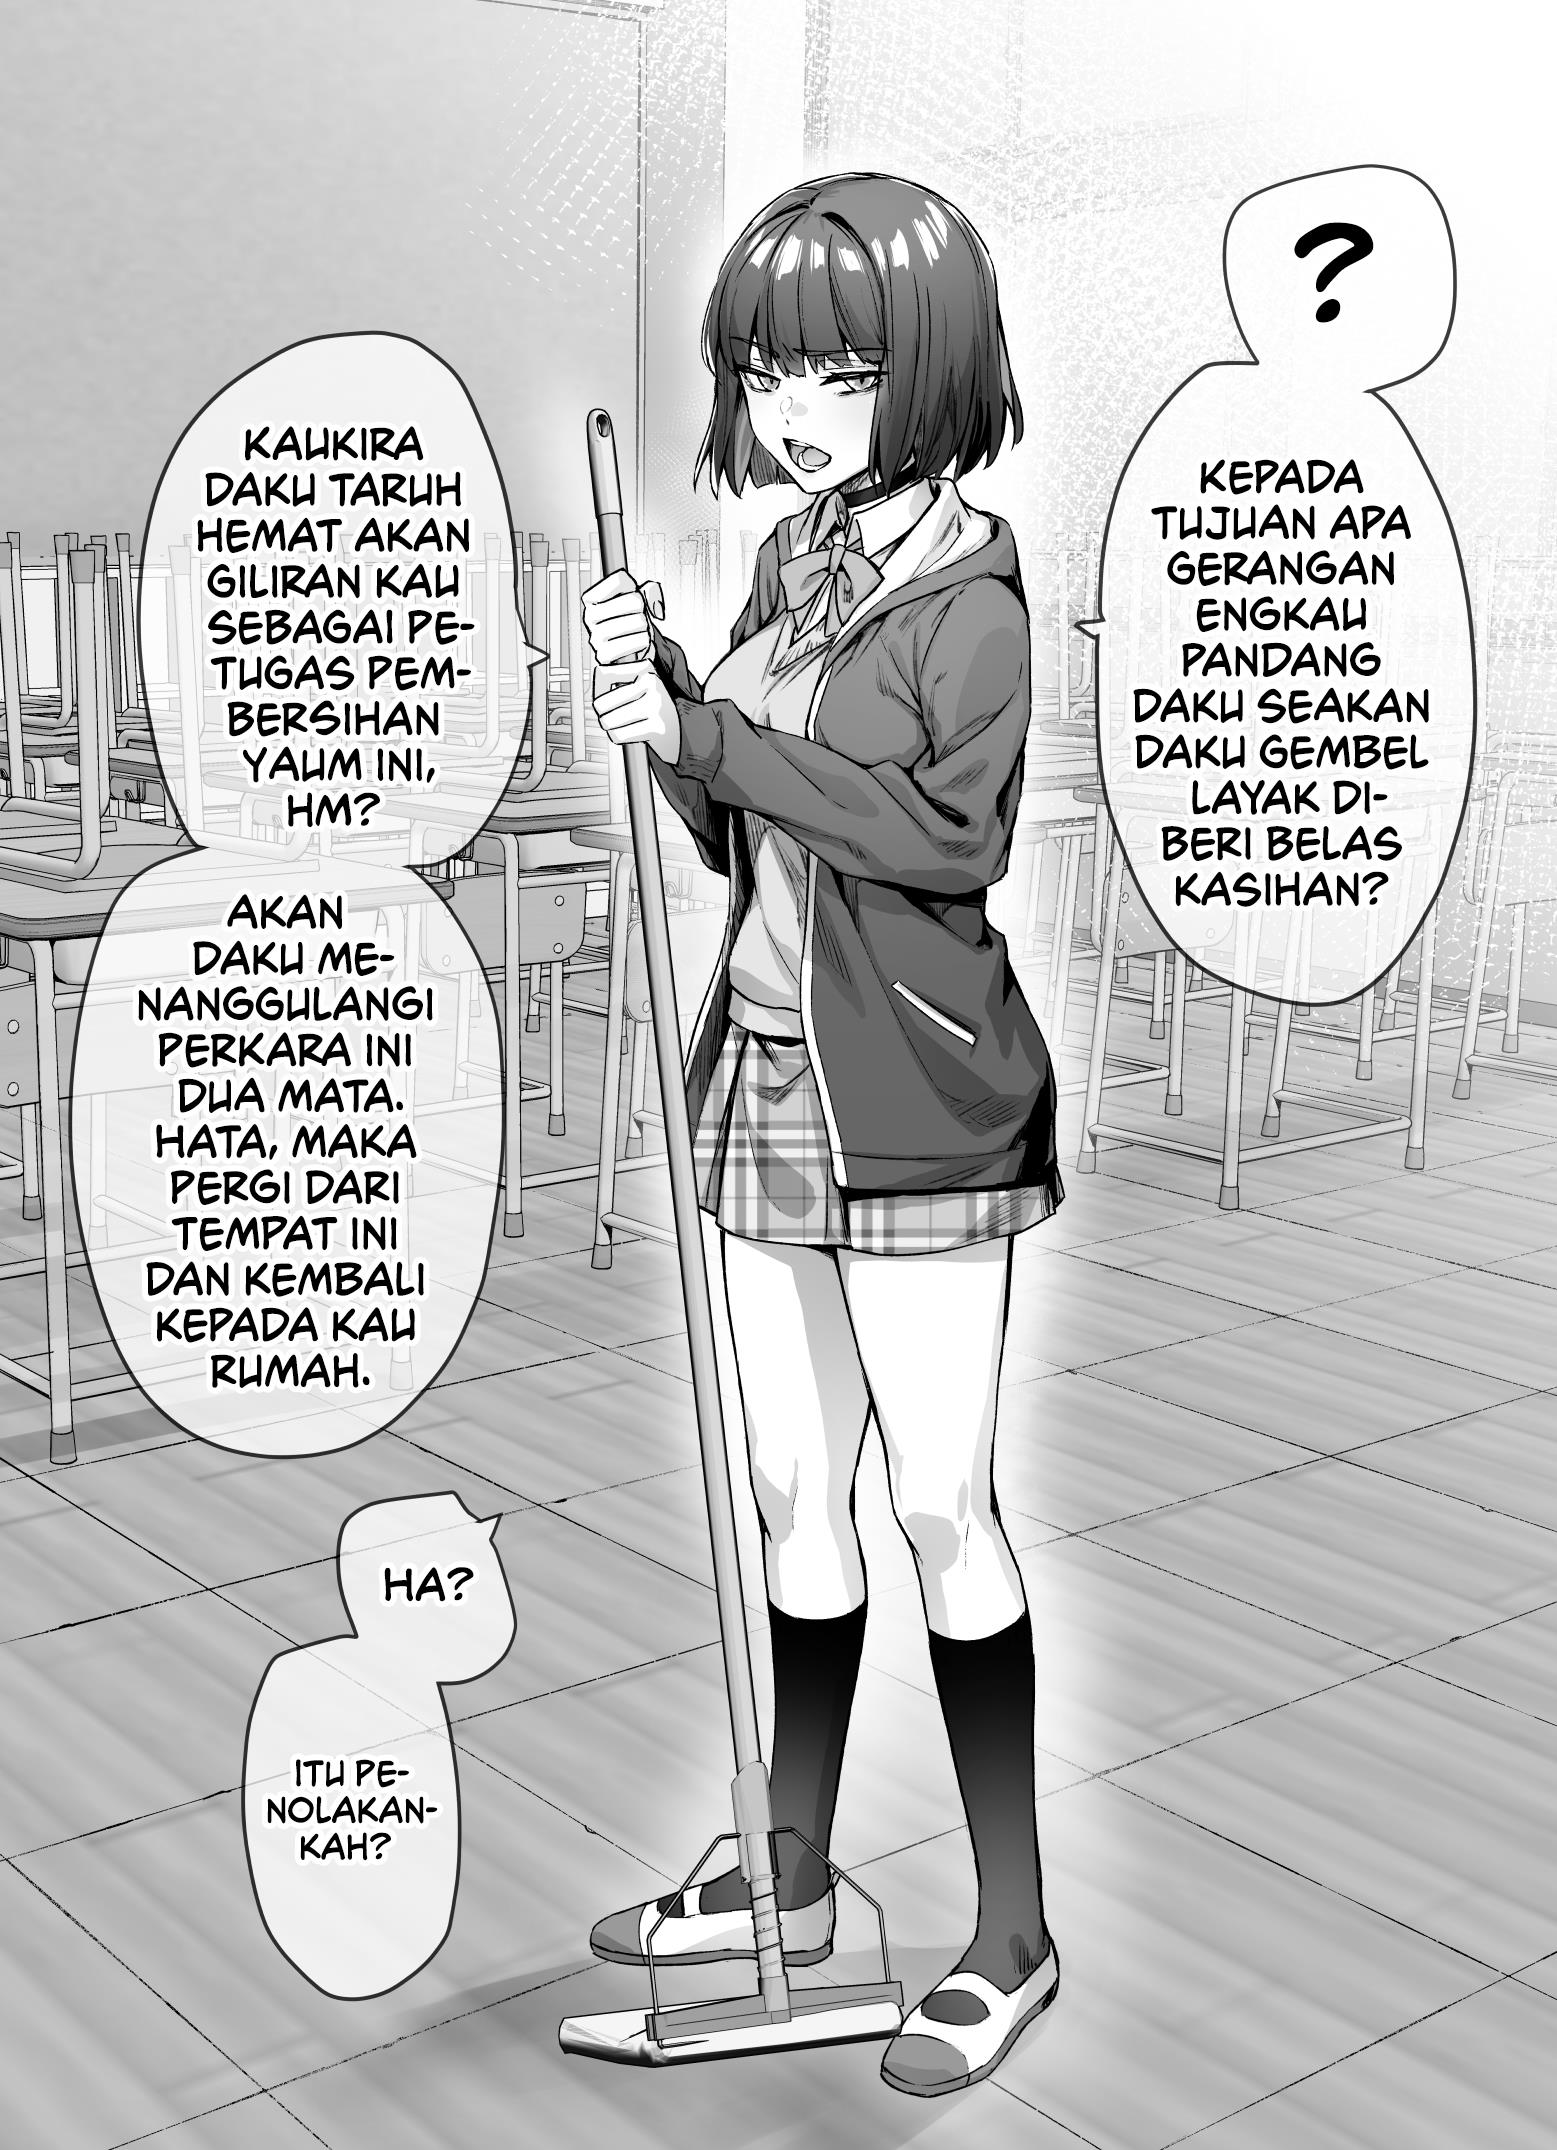 The Tsuntsuntsuntsuntsuntsun tsuntsuntsuntsuntsundere Girl Getting Less and Less Tsun Day by Day Chapter 5.2